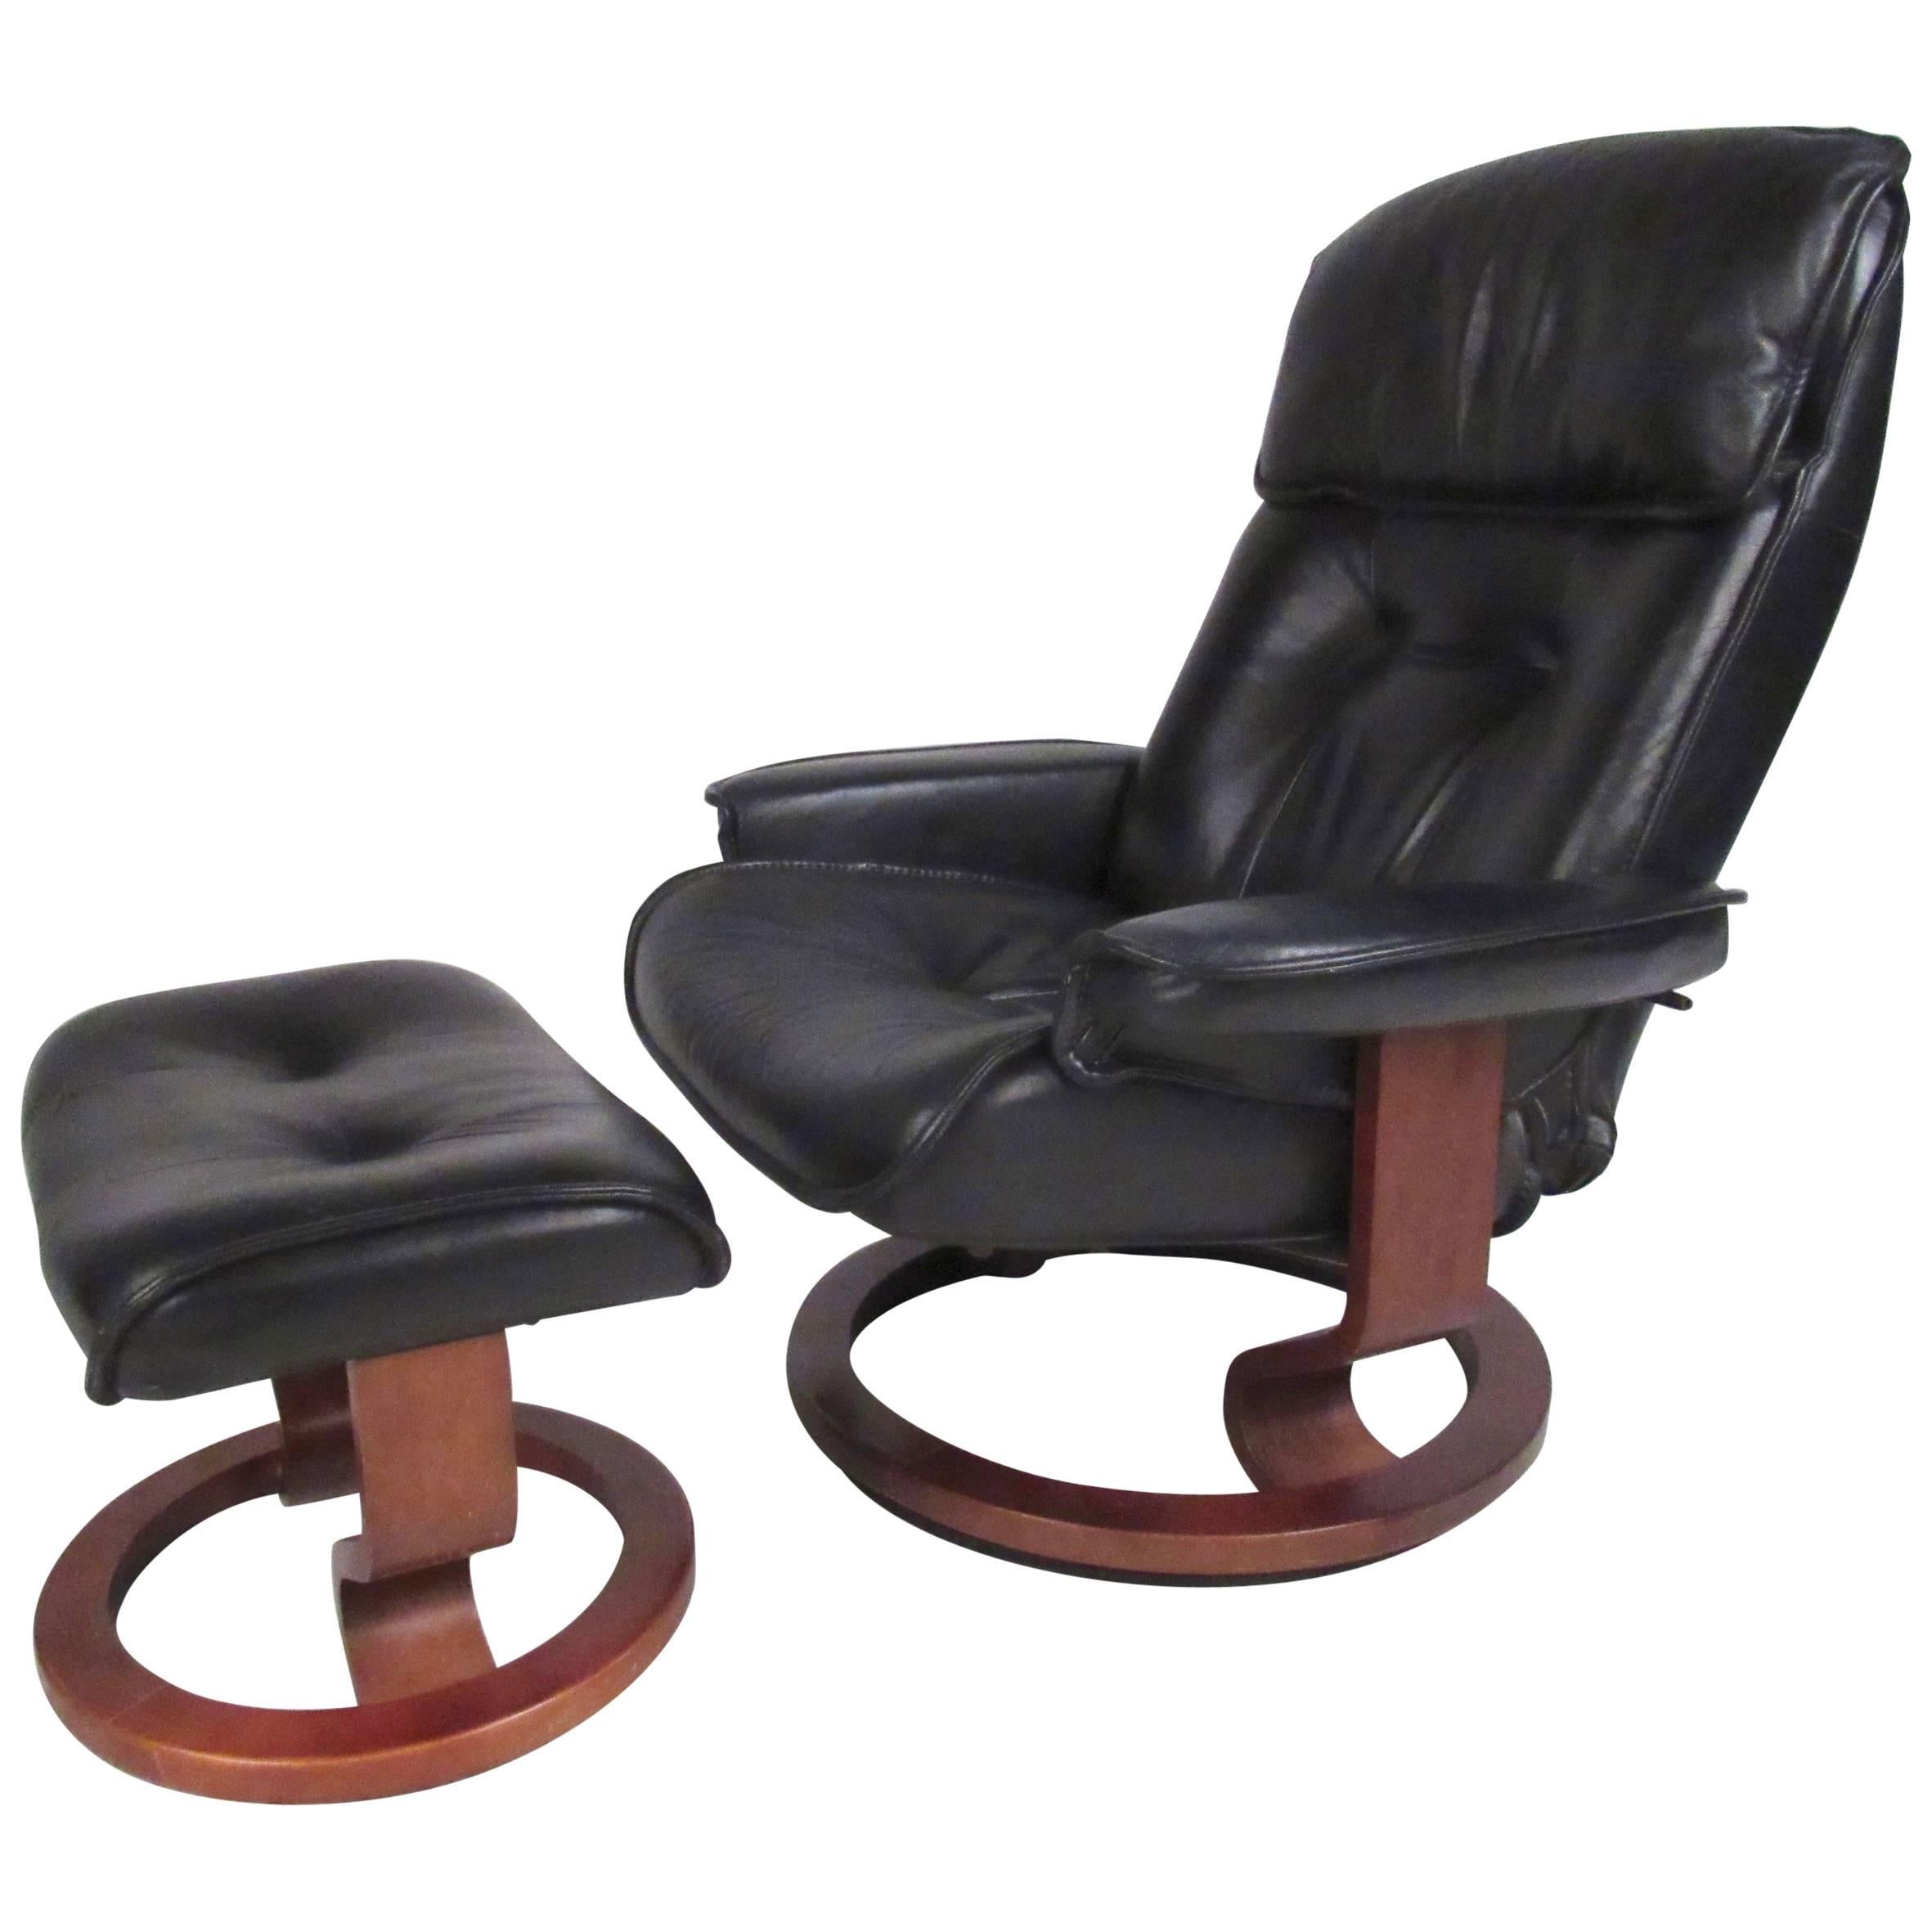 Danish Modern Leather Recliner For, Swivel Leather Recliners